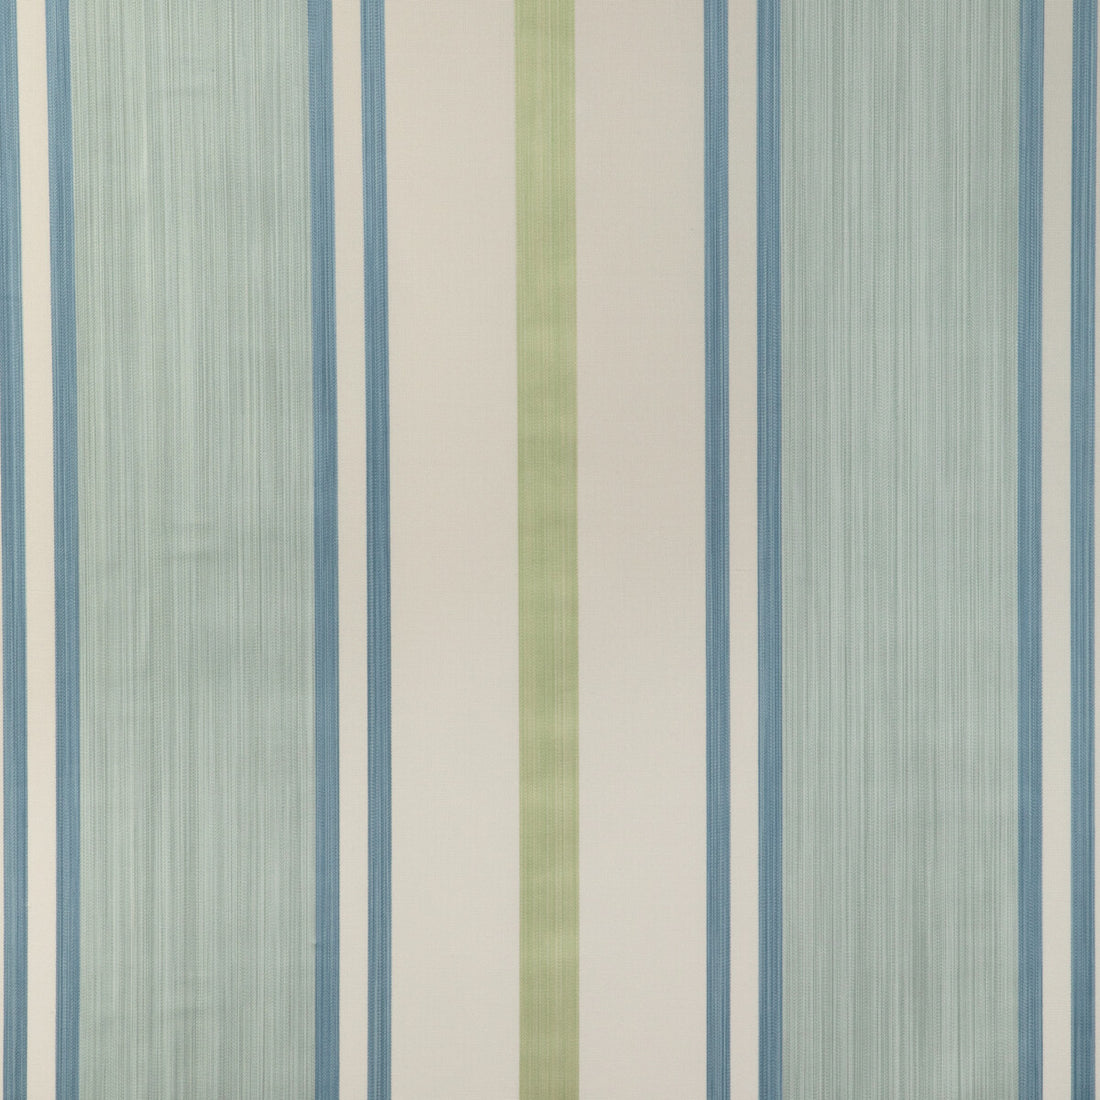 Davies Stripe fabric in aqua/leaf color - pattern 2023110.353.0 - by Lee Jofa in the Highfield Stripes And Plaids collection